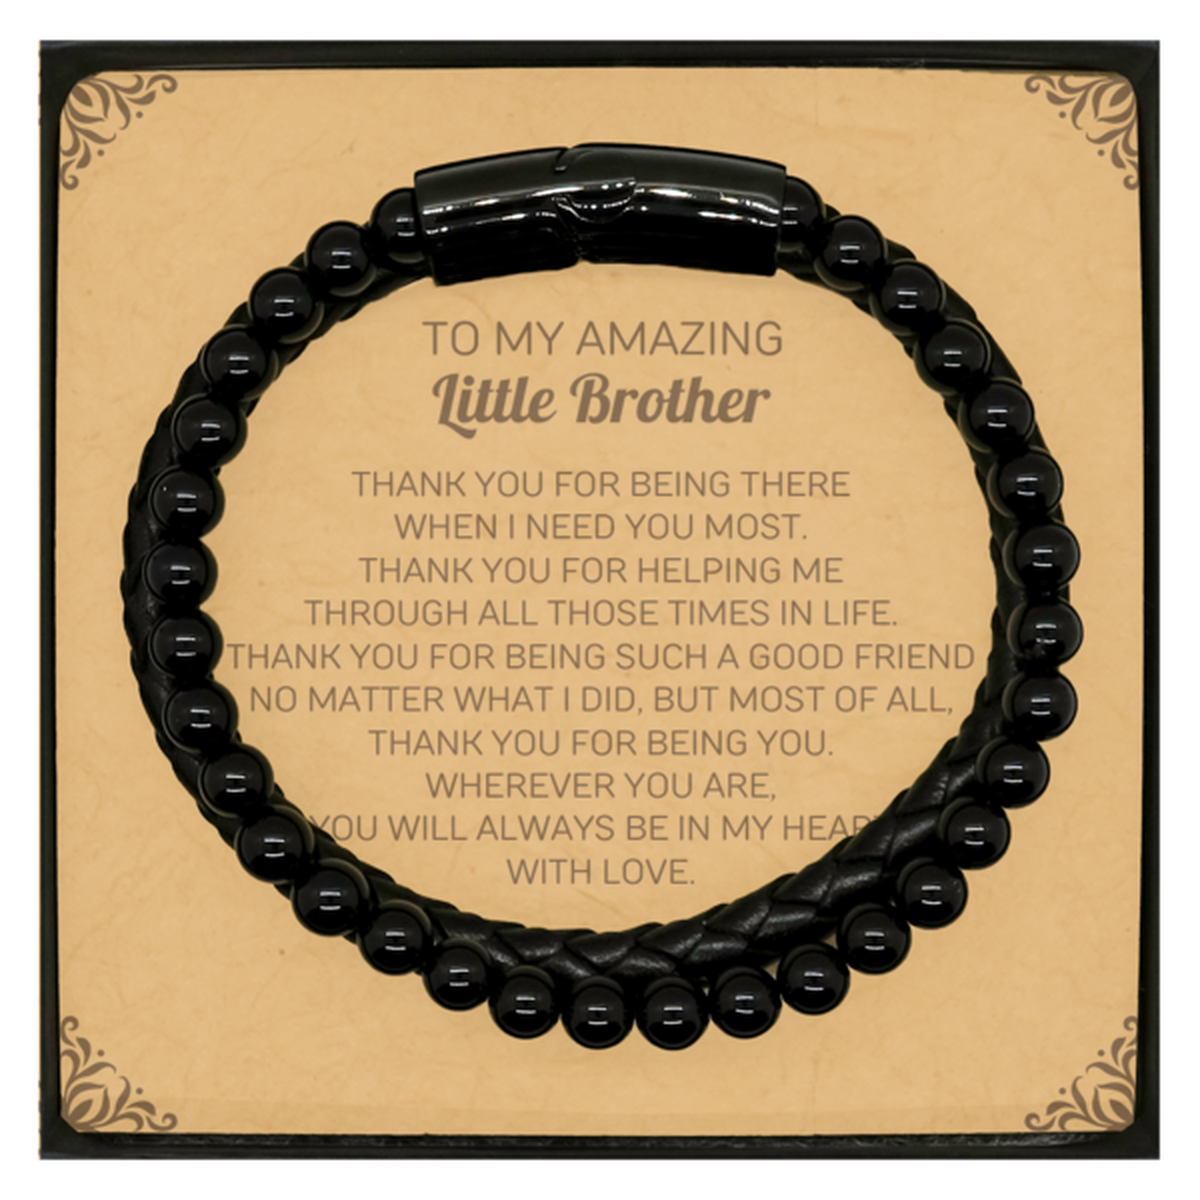 To My Amazing Little Brother Stone Leather Bracelets, Thank you for being there, Thank You Gifts For Little Brother, Birthday, Christmas Unique Gifts For Little Brother